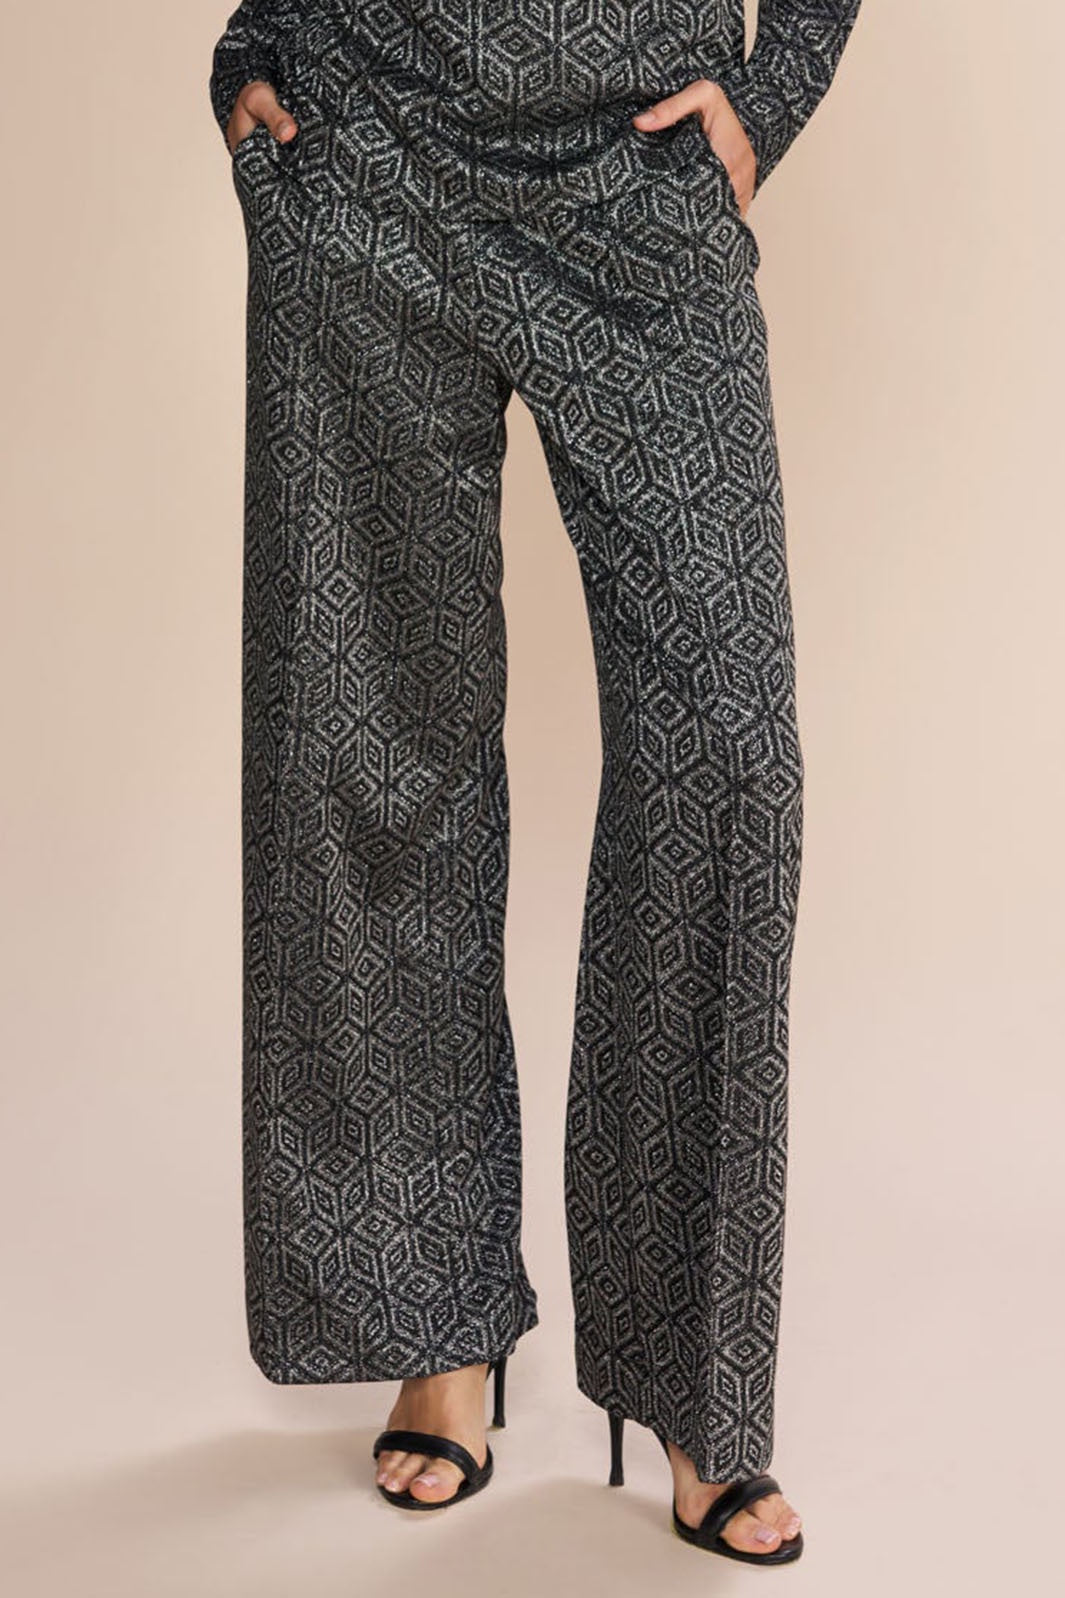 Mos Mosh 157980 MMZimu Black Silver Glam Trousers - Dotique Chesterfield